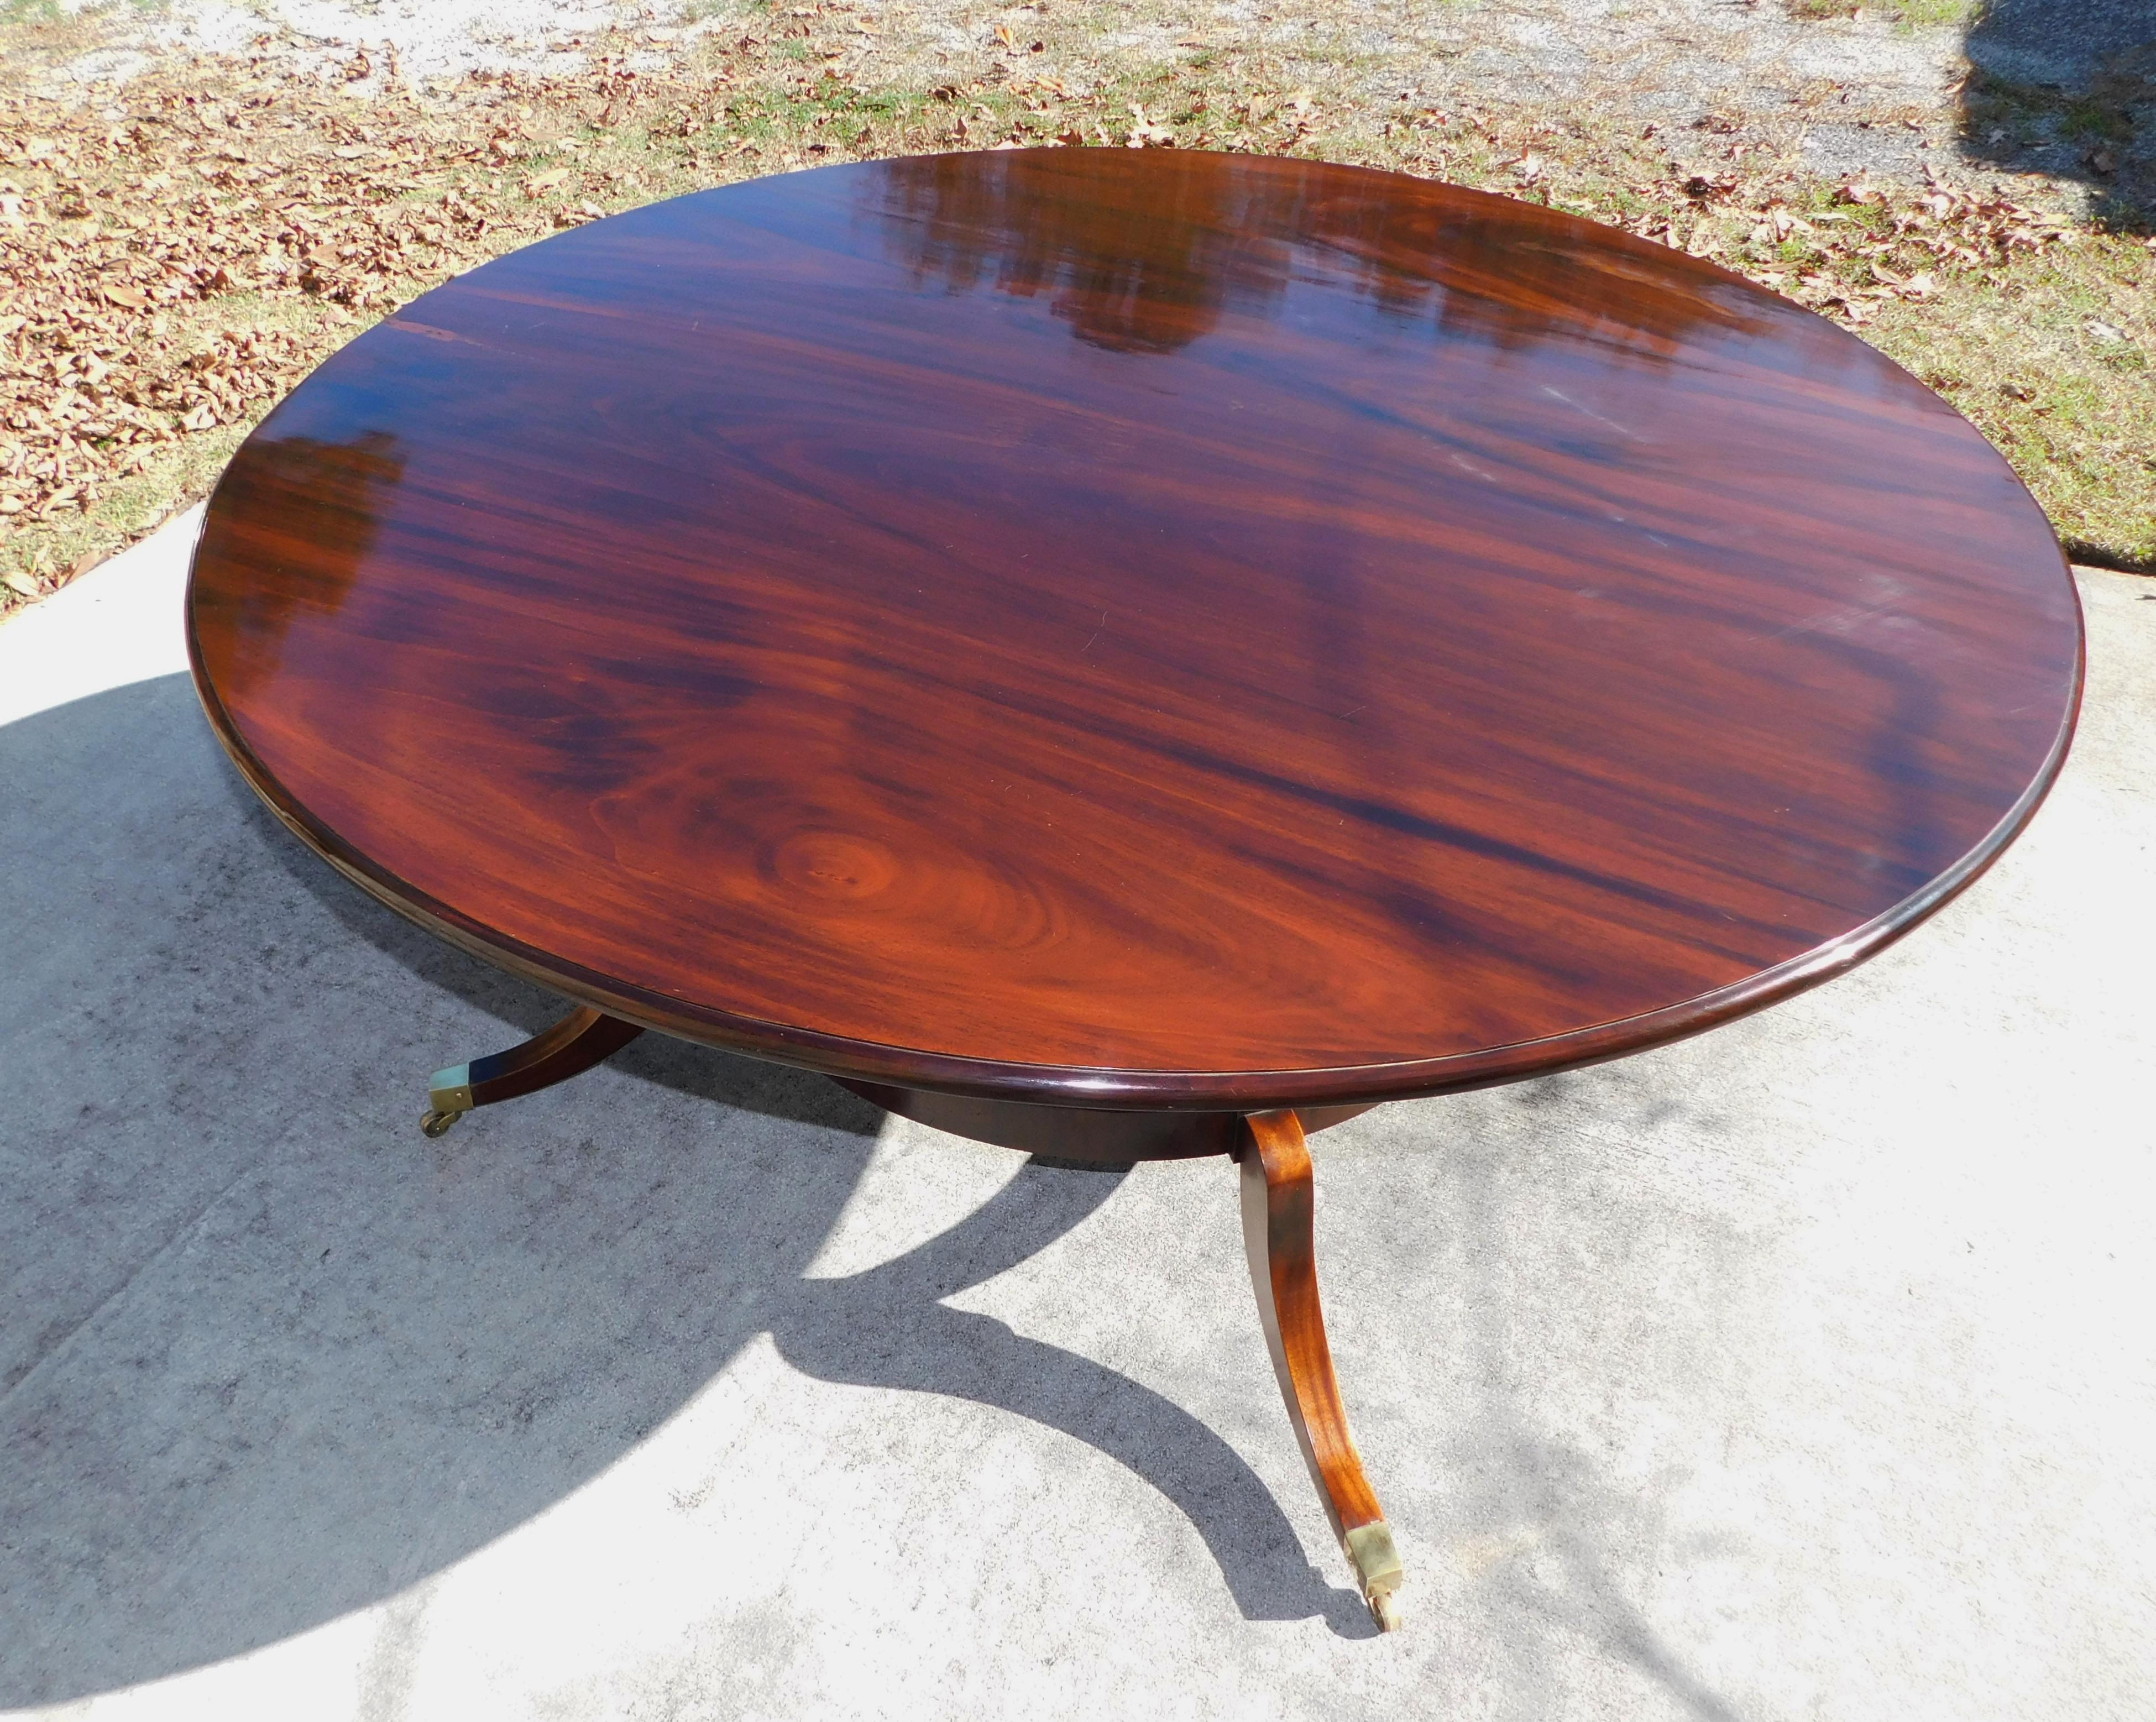 Hand-Carved English Regency Mahogany Circular Dining Table with Splayed Legs on Casters 1850 For Sale